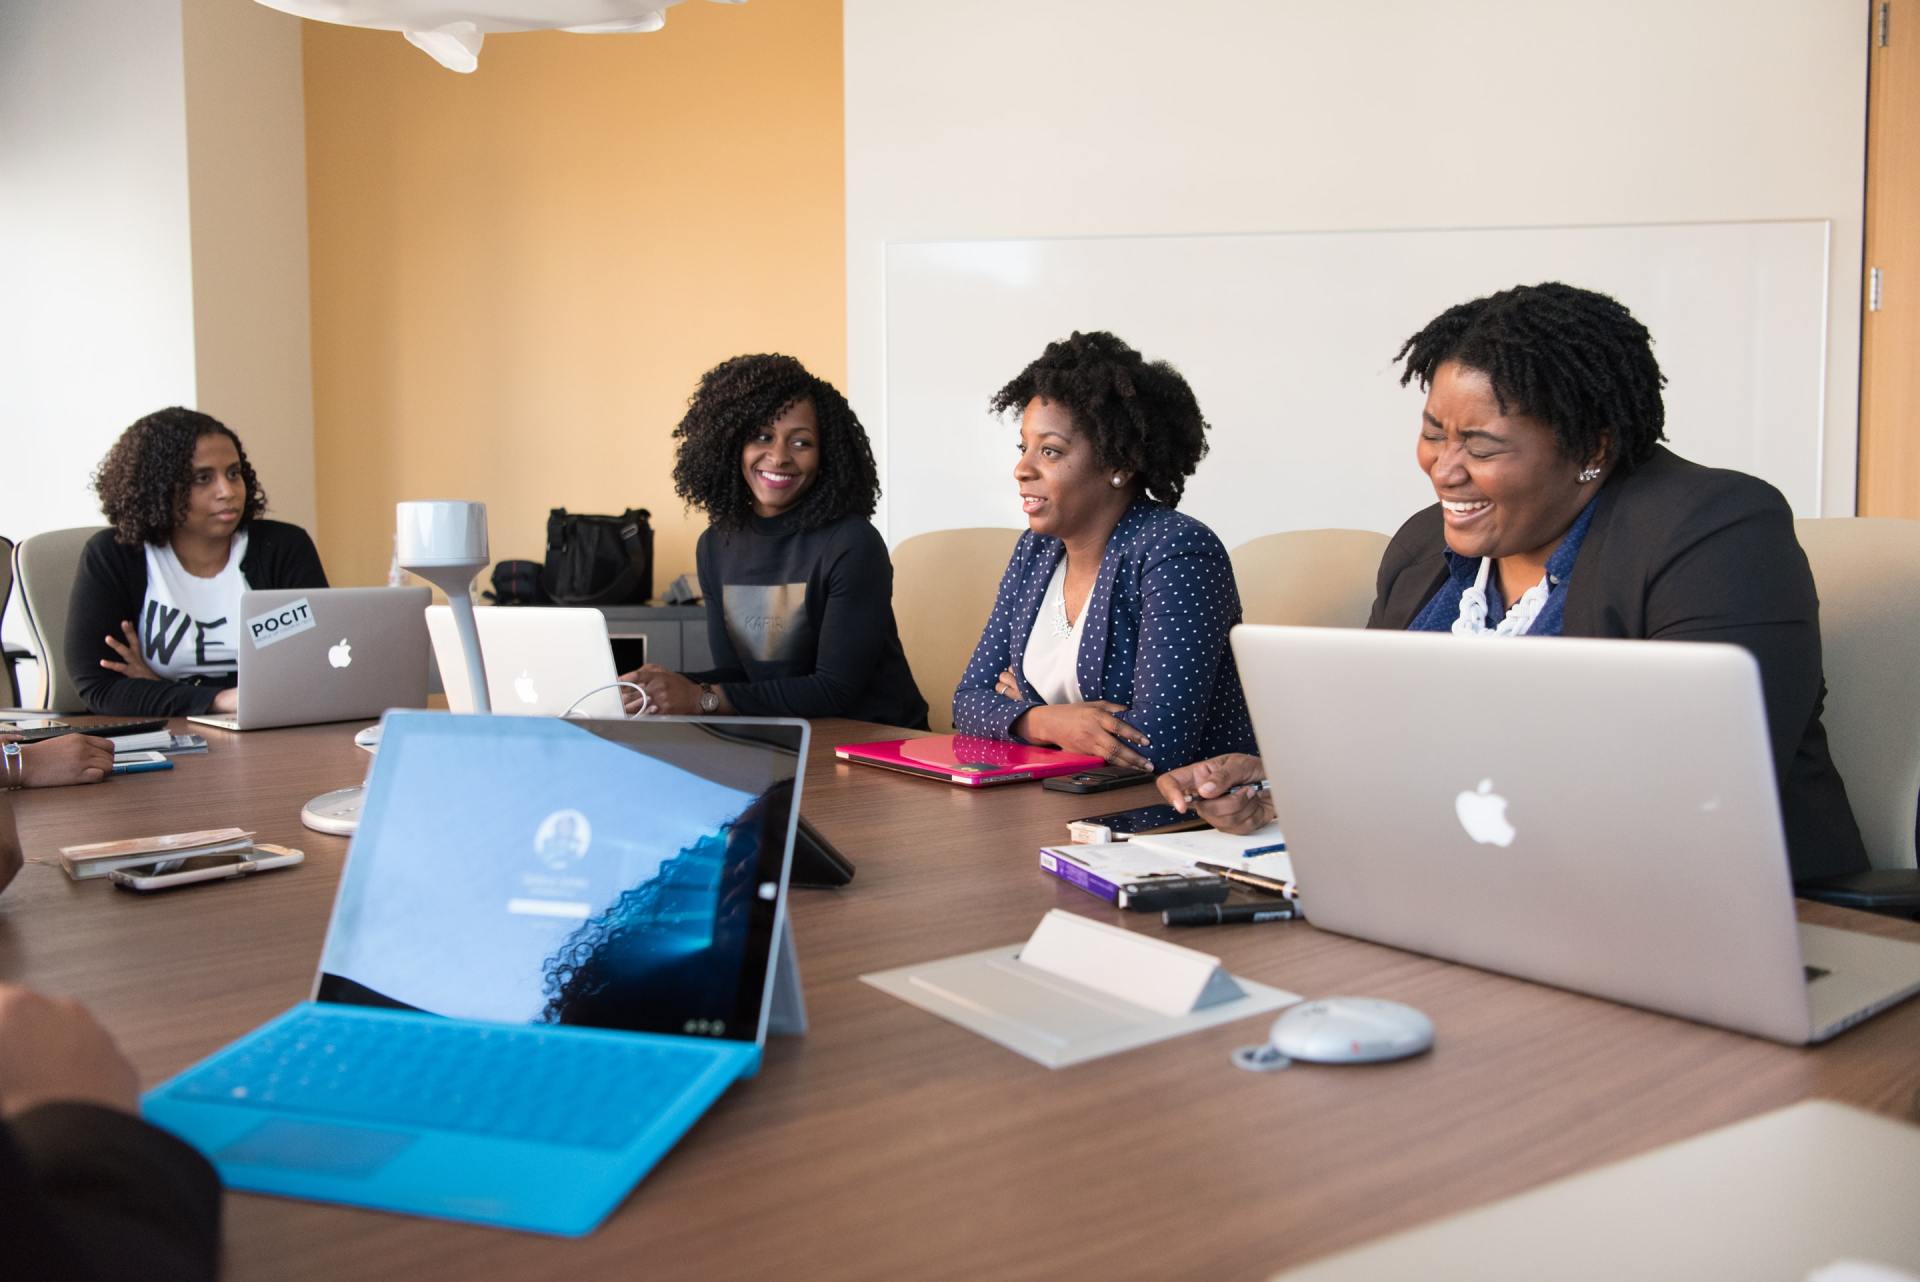 Group of young women at a conference table using laptop computers